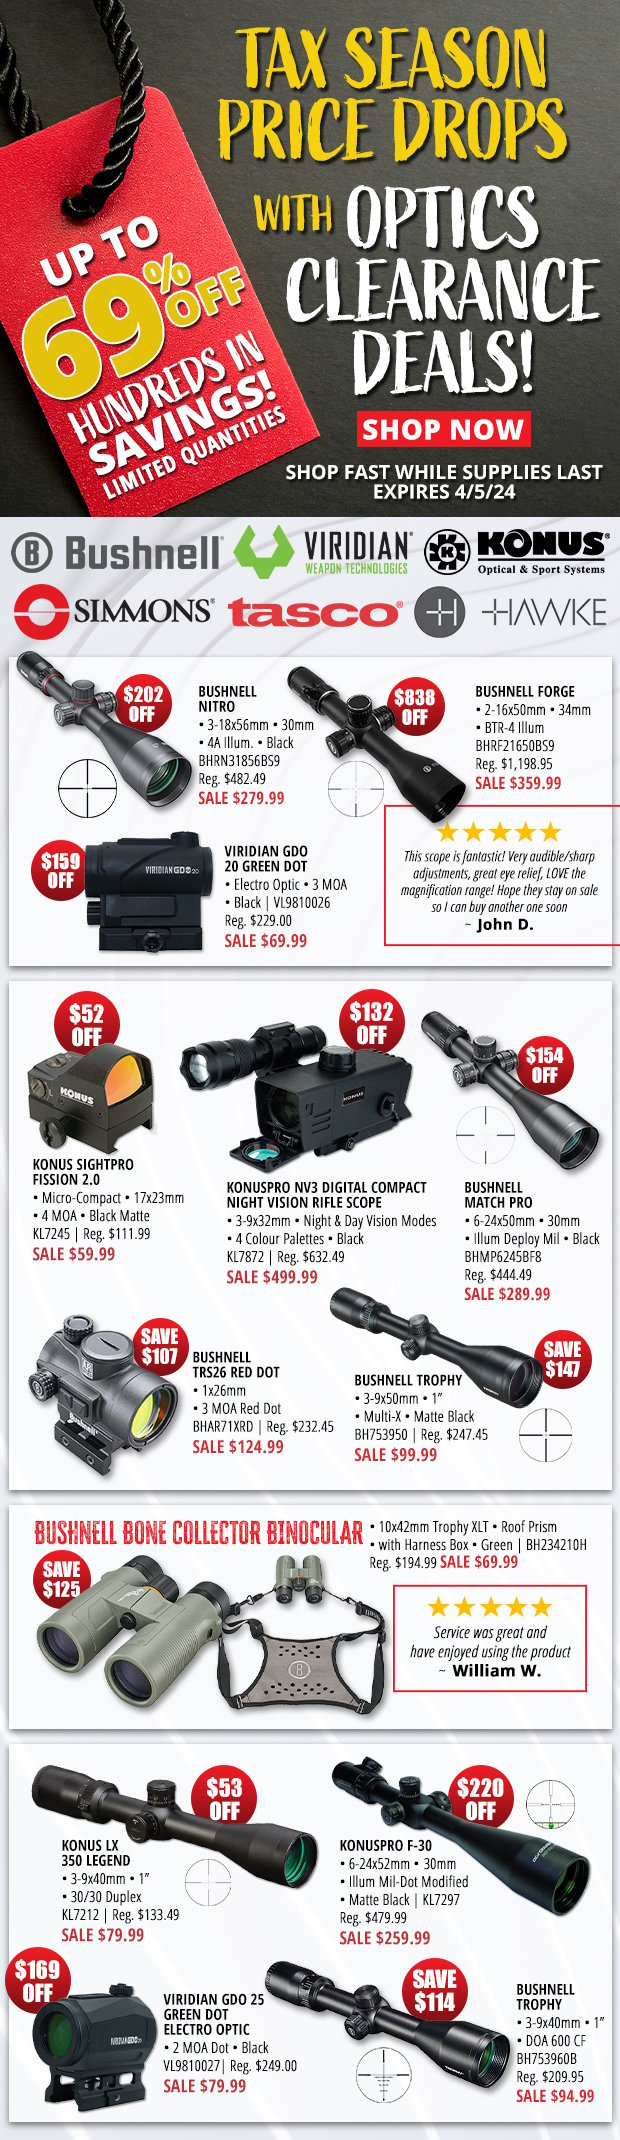 Tax Season Price Drops with Up to 69% Off Optics Clearance Deals!